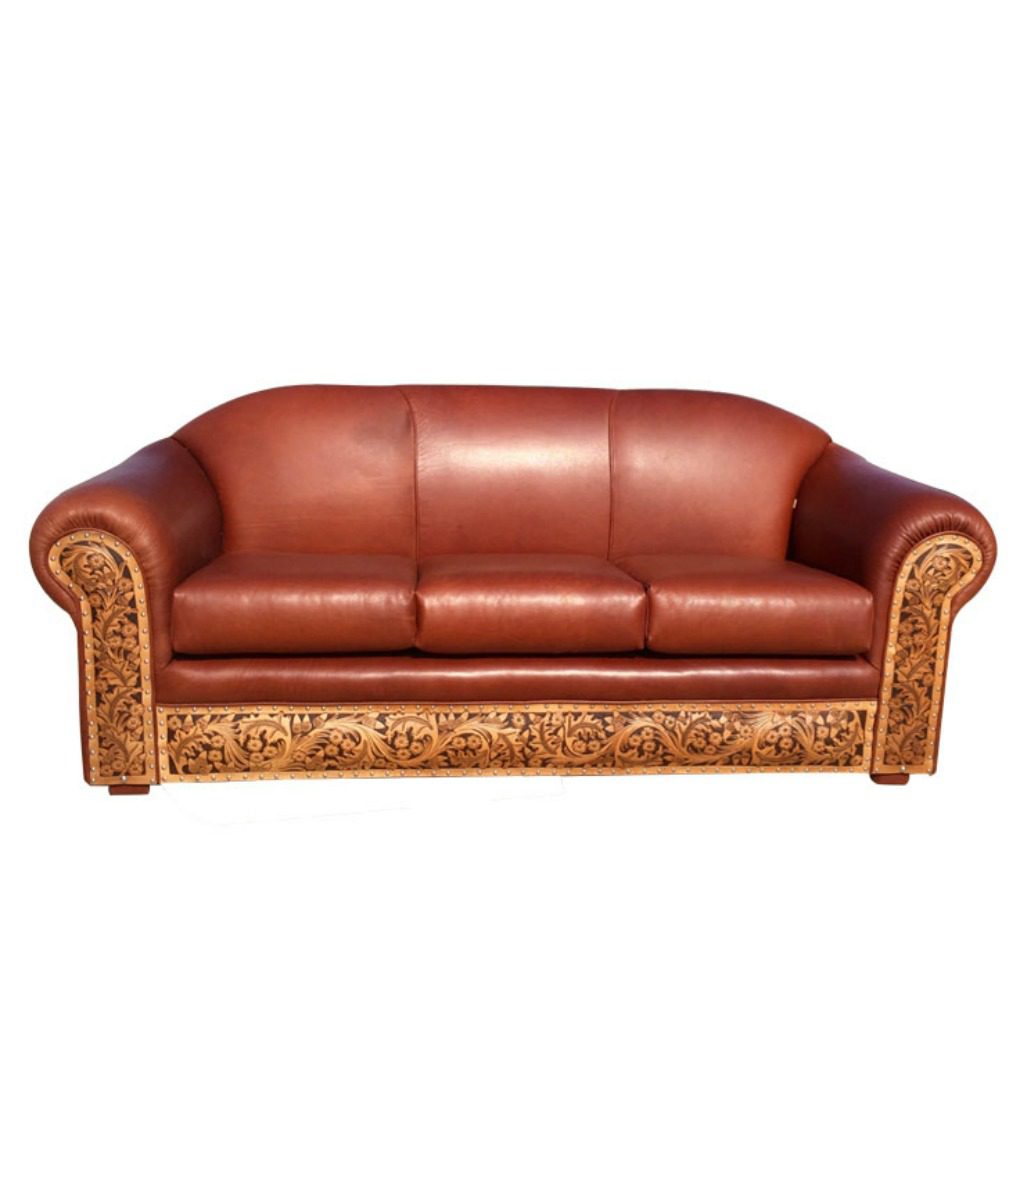 Brown Leather Sofa With Tooled, Tooled Leather Furniture